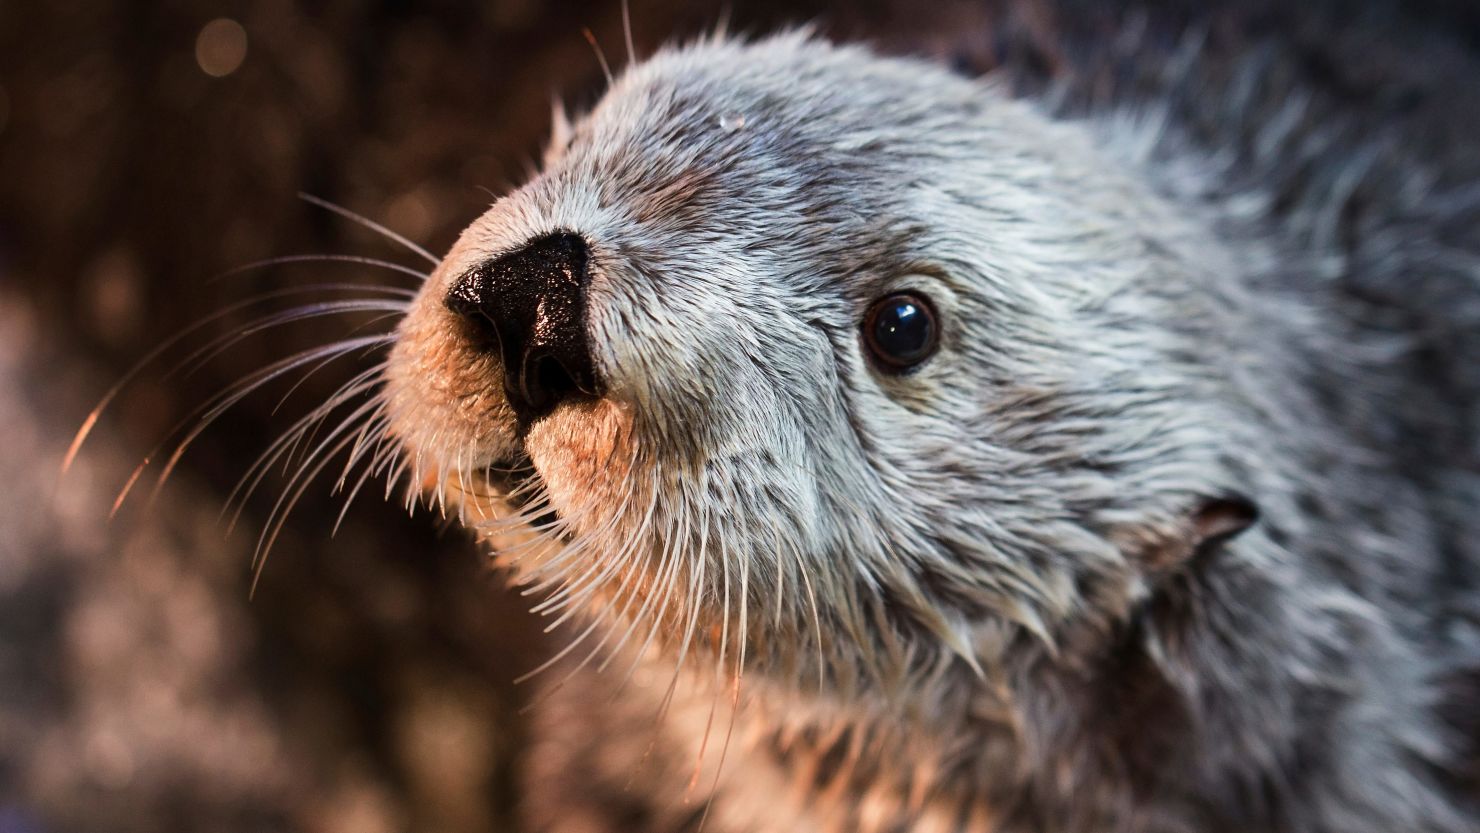 Charlie, a male sea otter at the Aquarium of the Pacific, died Monday as the oldest southern sea otter at any zoo or aquarium.